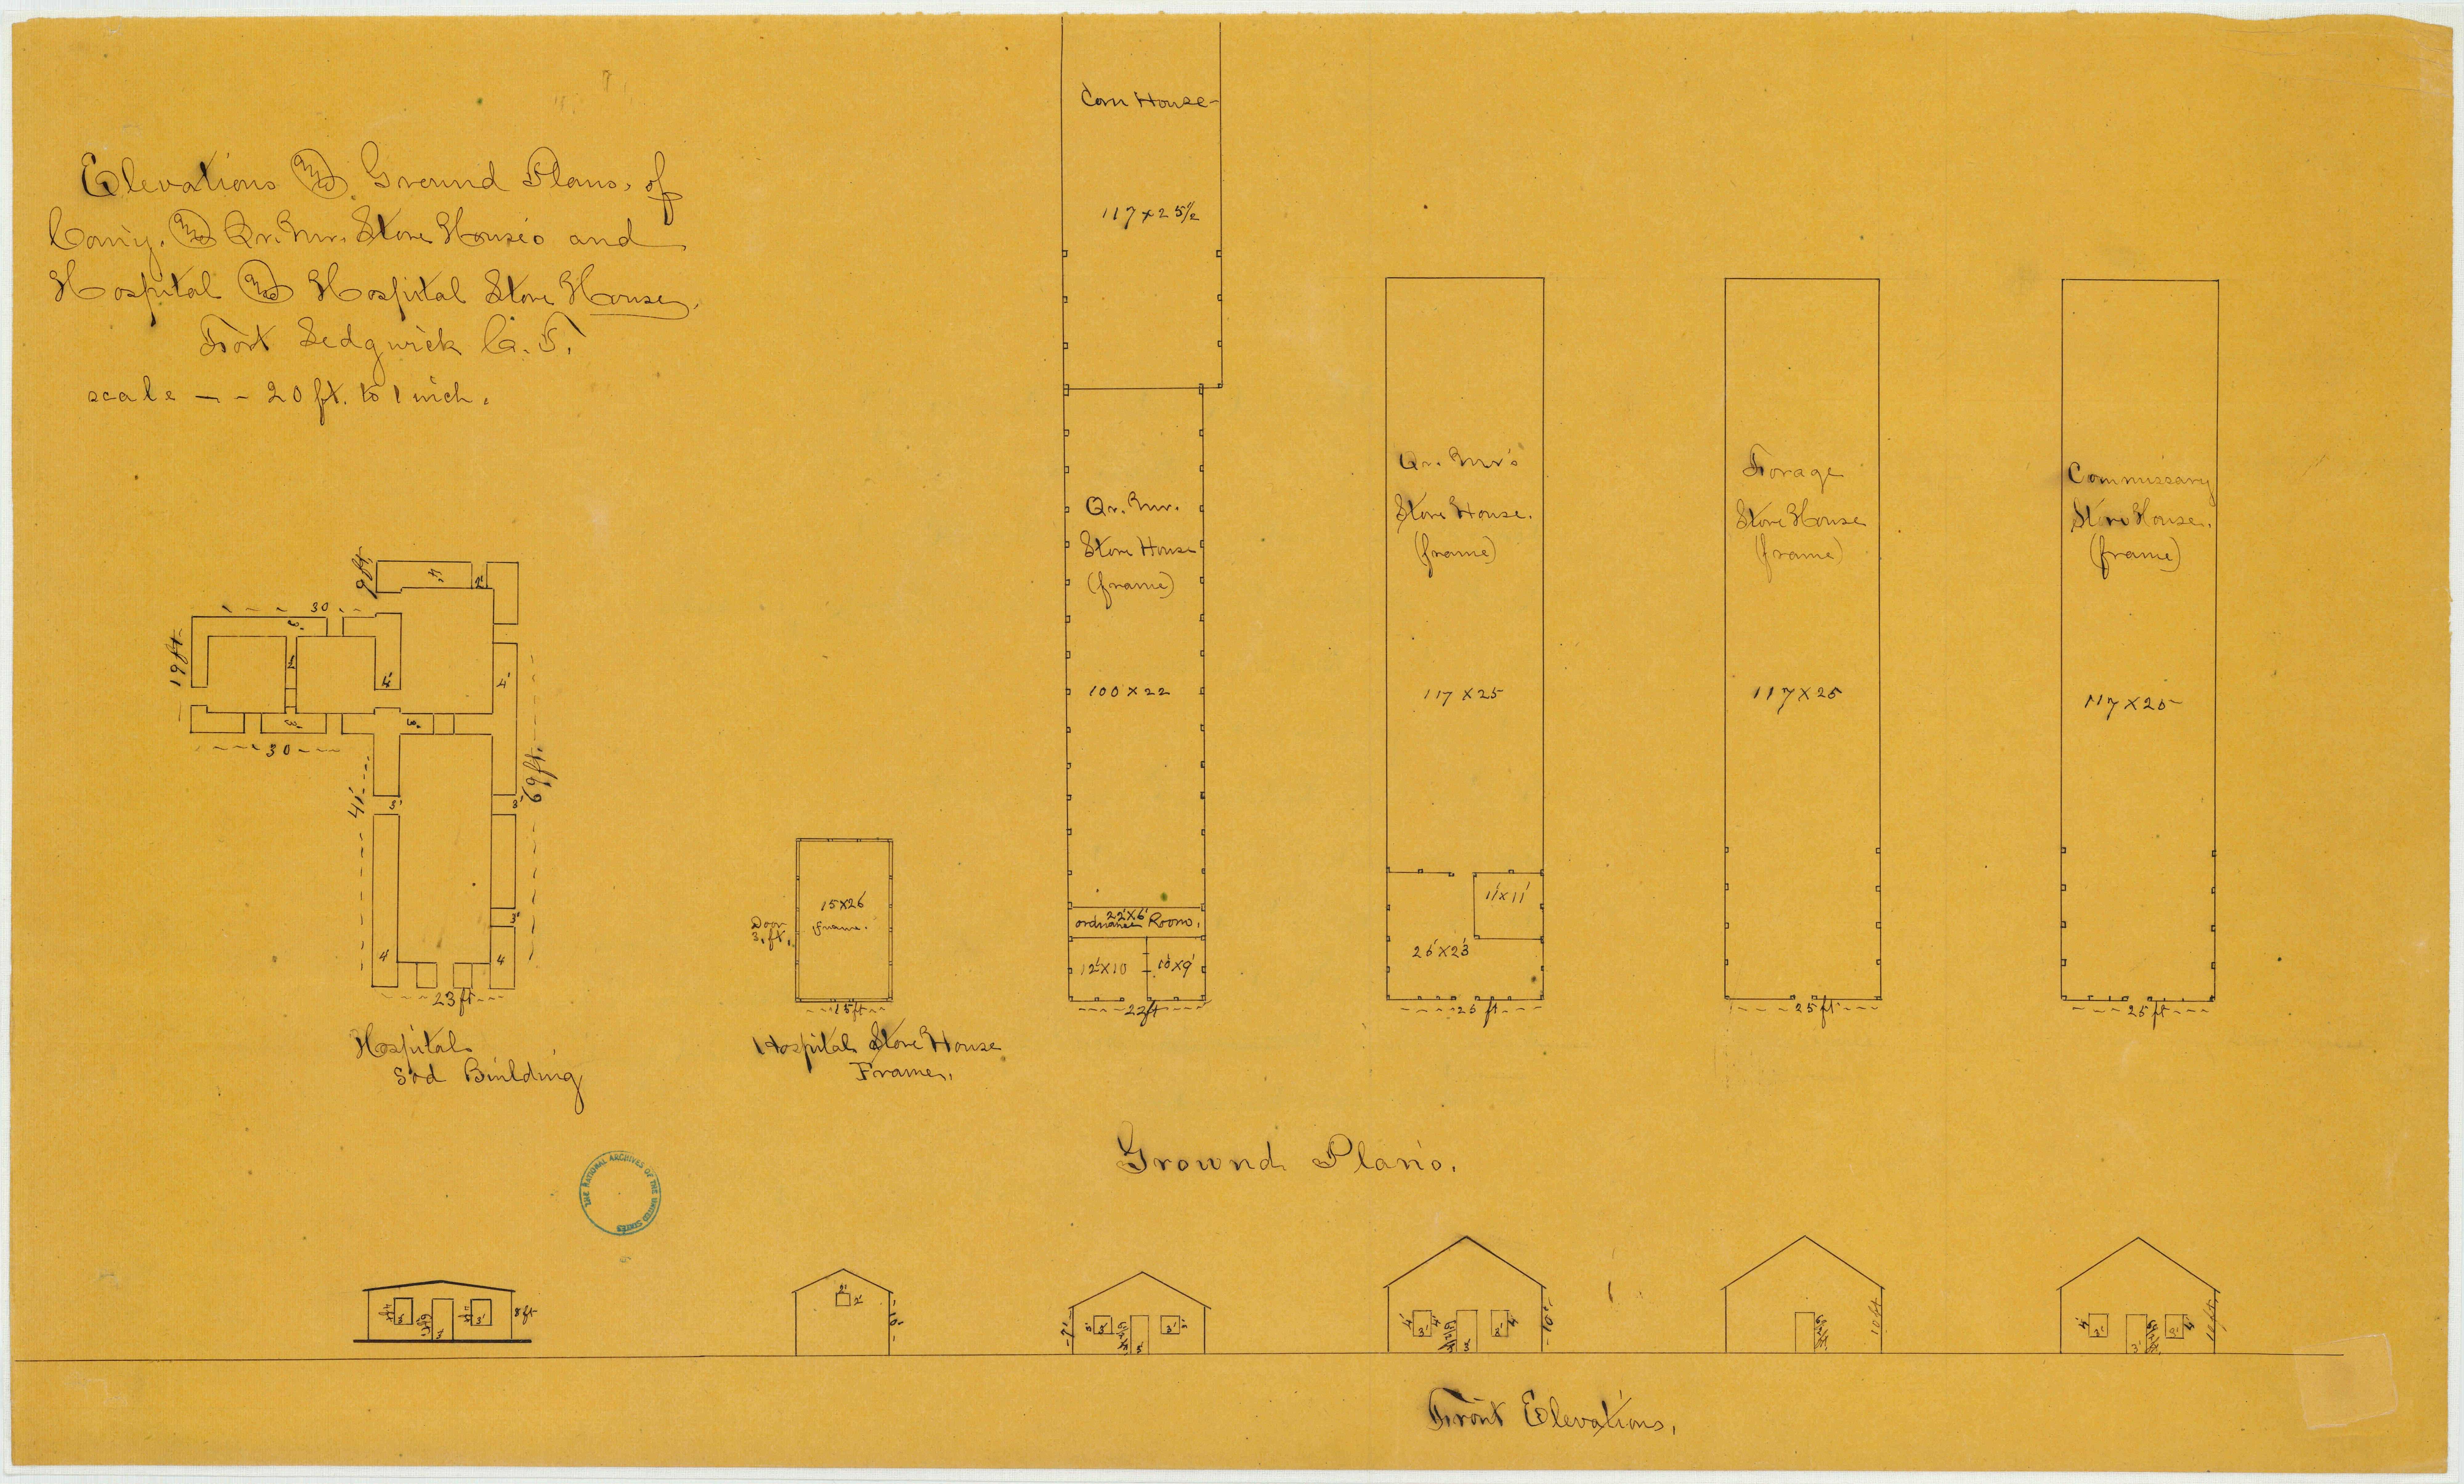 1866 military drawing of floor plan and elevations of buildings on Fort Sedgwick. (Courtesy of the Map Division, Archives II, NARA)